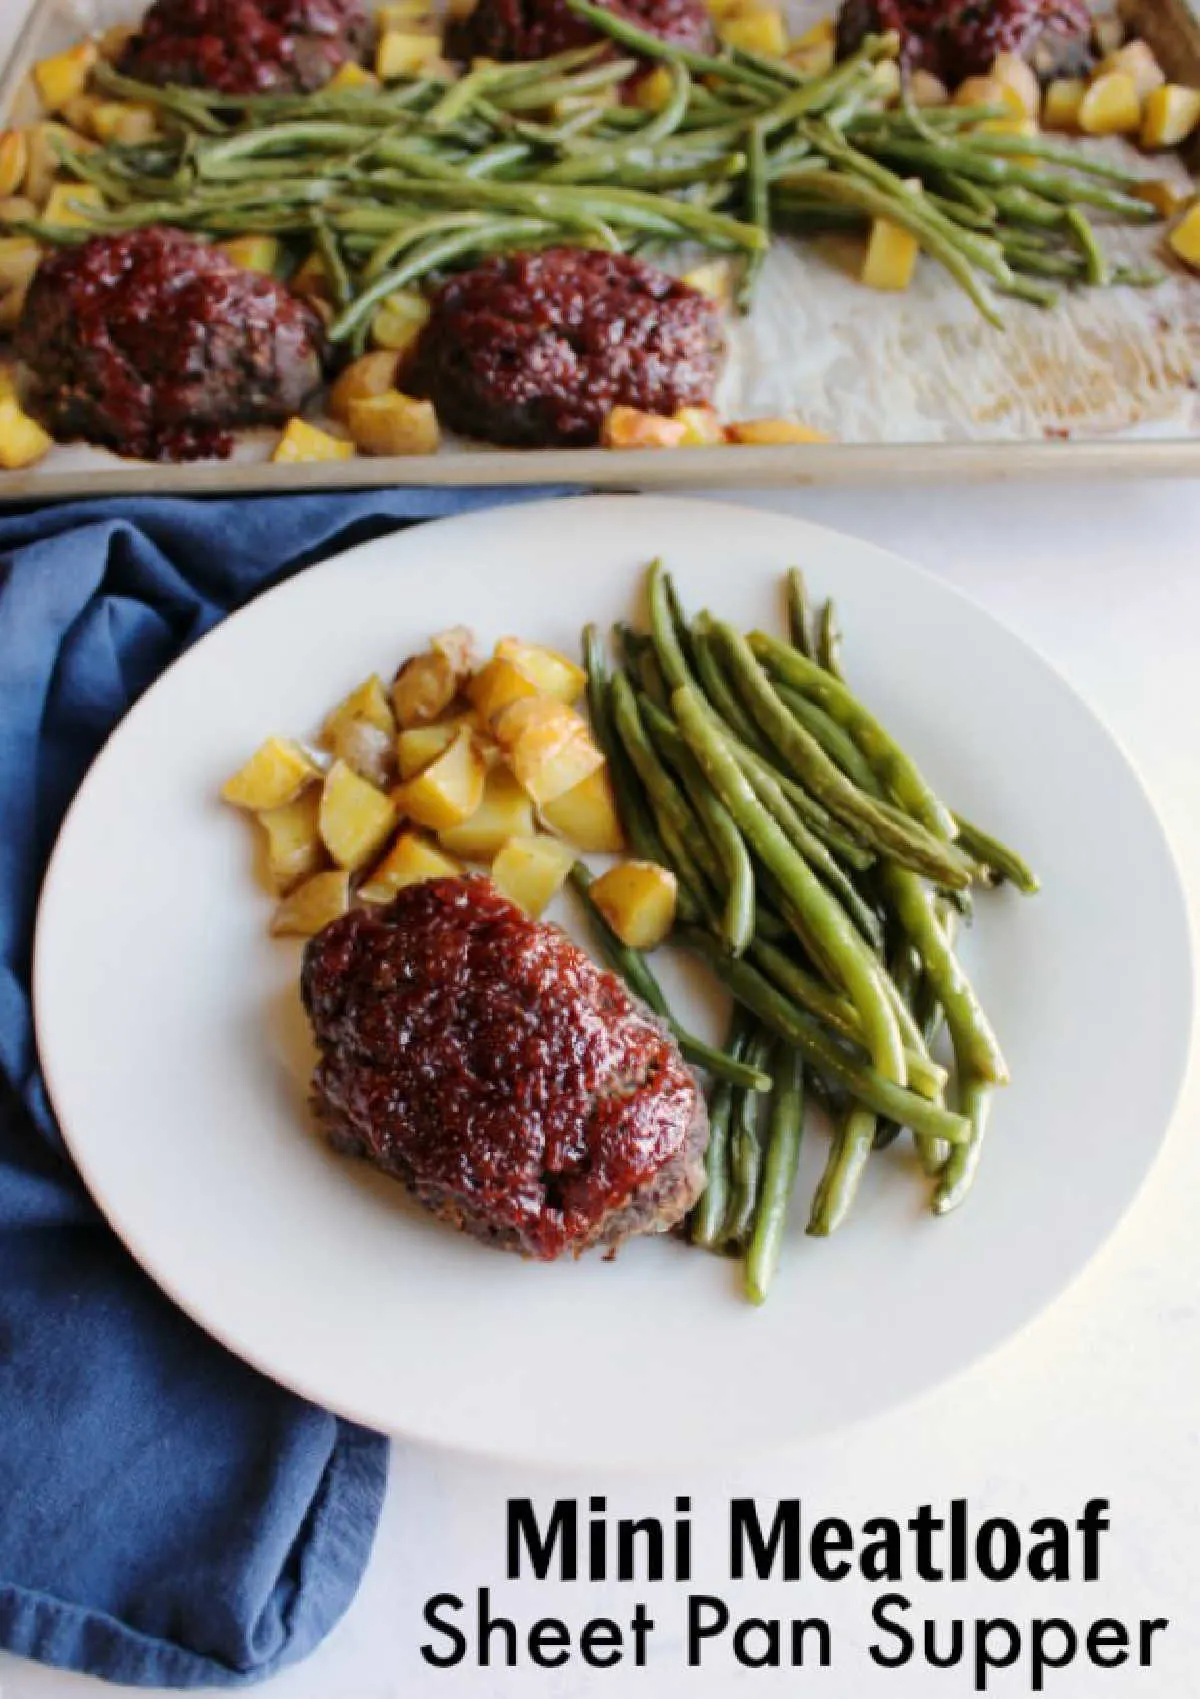 Make your whole homestyle meal on one sheet pan. Everyone can enjoy their own mini meatloaf along with roasted green beans and potatoes and there's only one pan to clean!